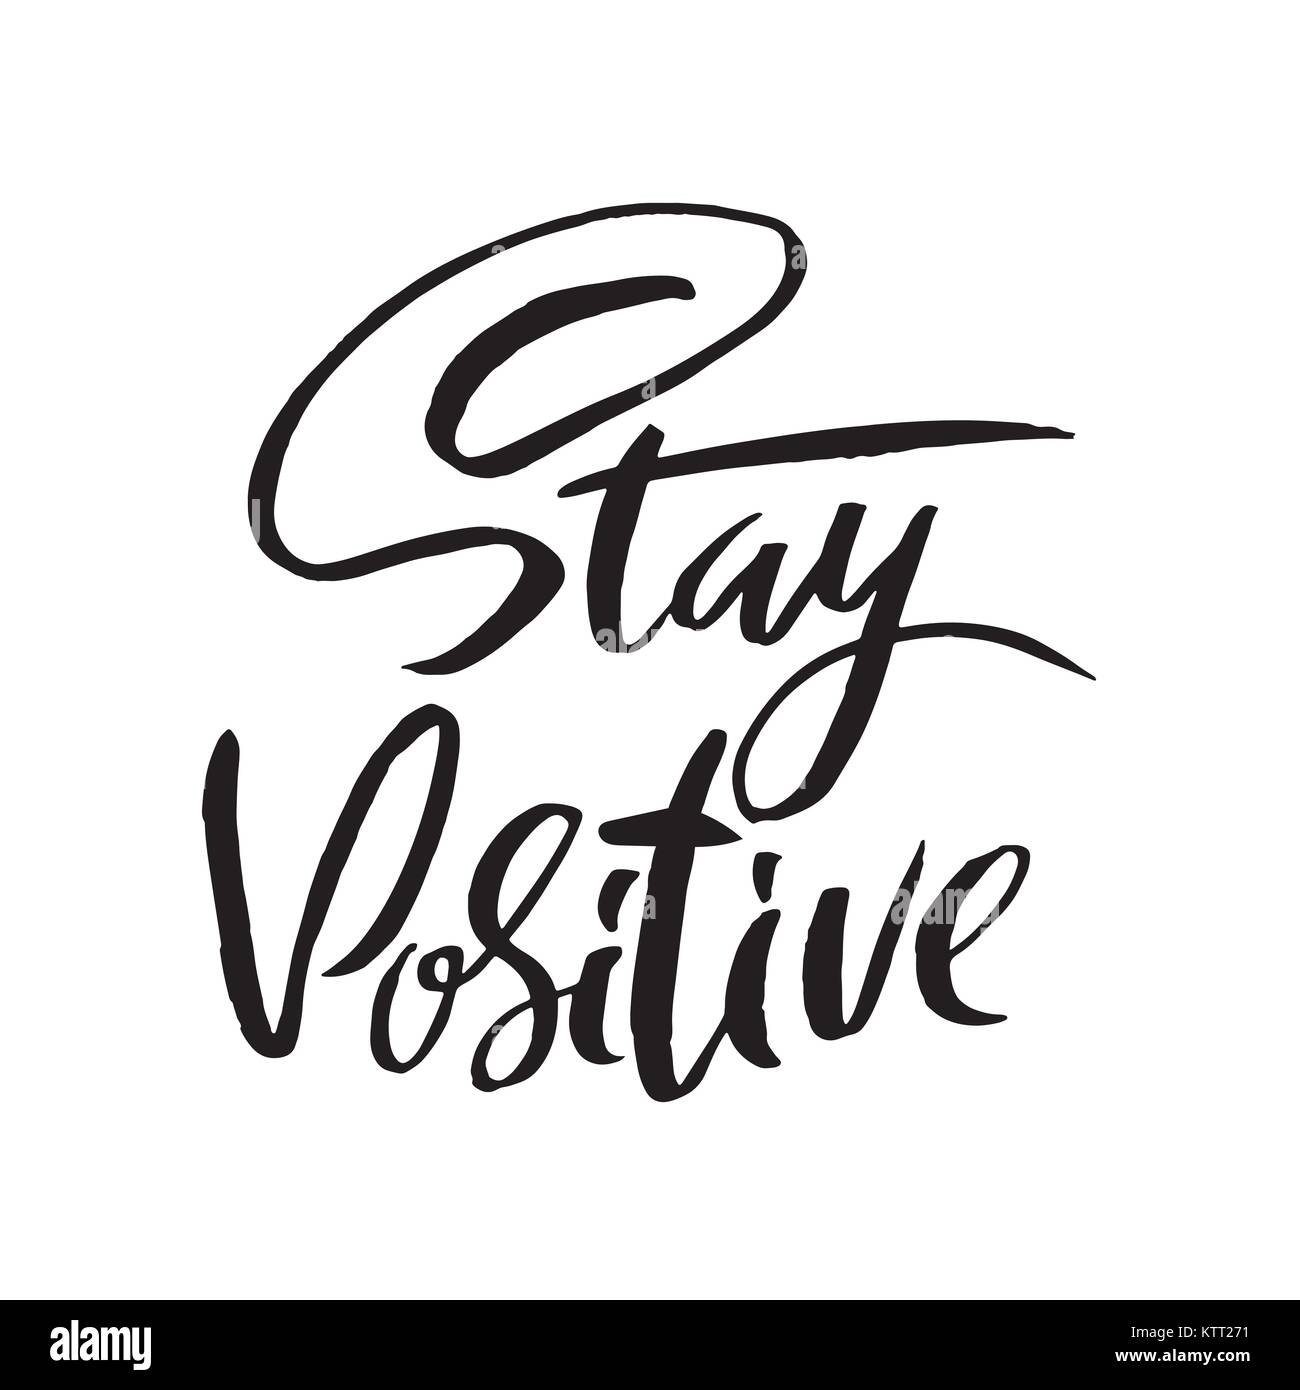 Stay positive. Motivation modern dry brush calligraphy. Handwritten quote. Printable phrase. Be awesome. Stock Vector